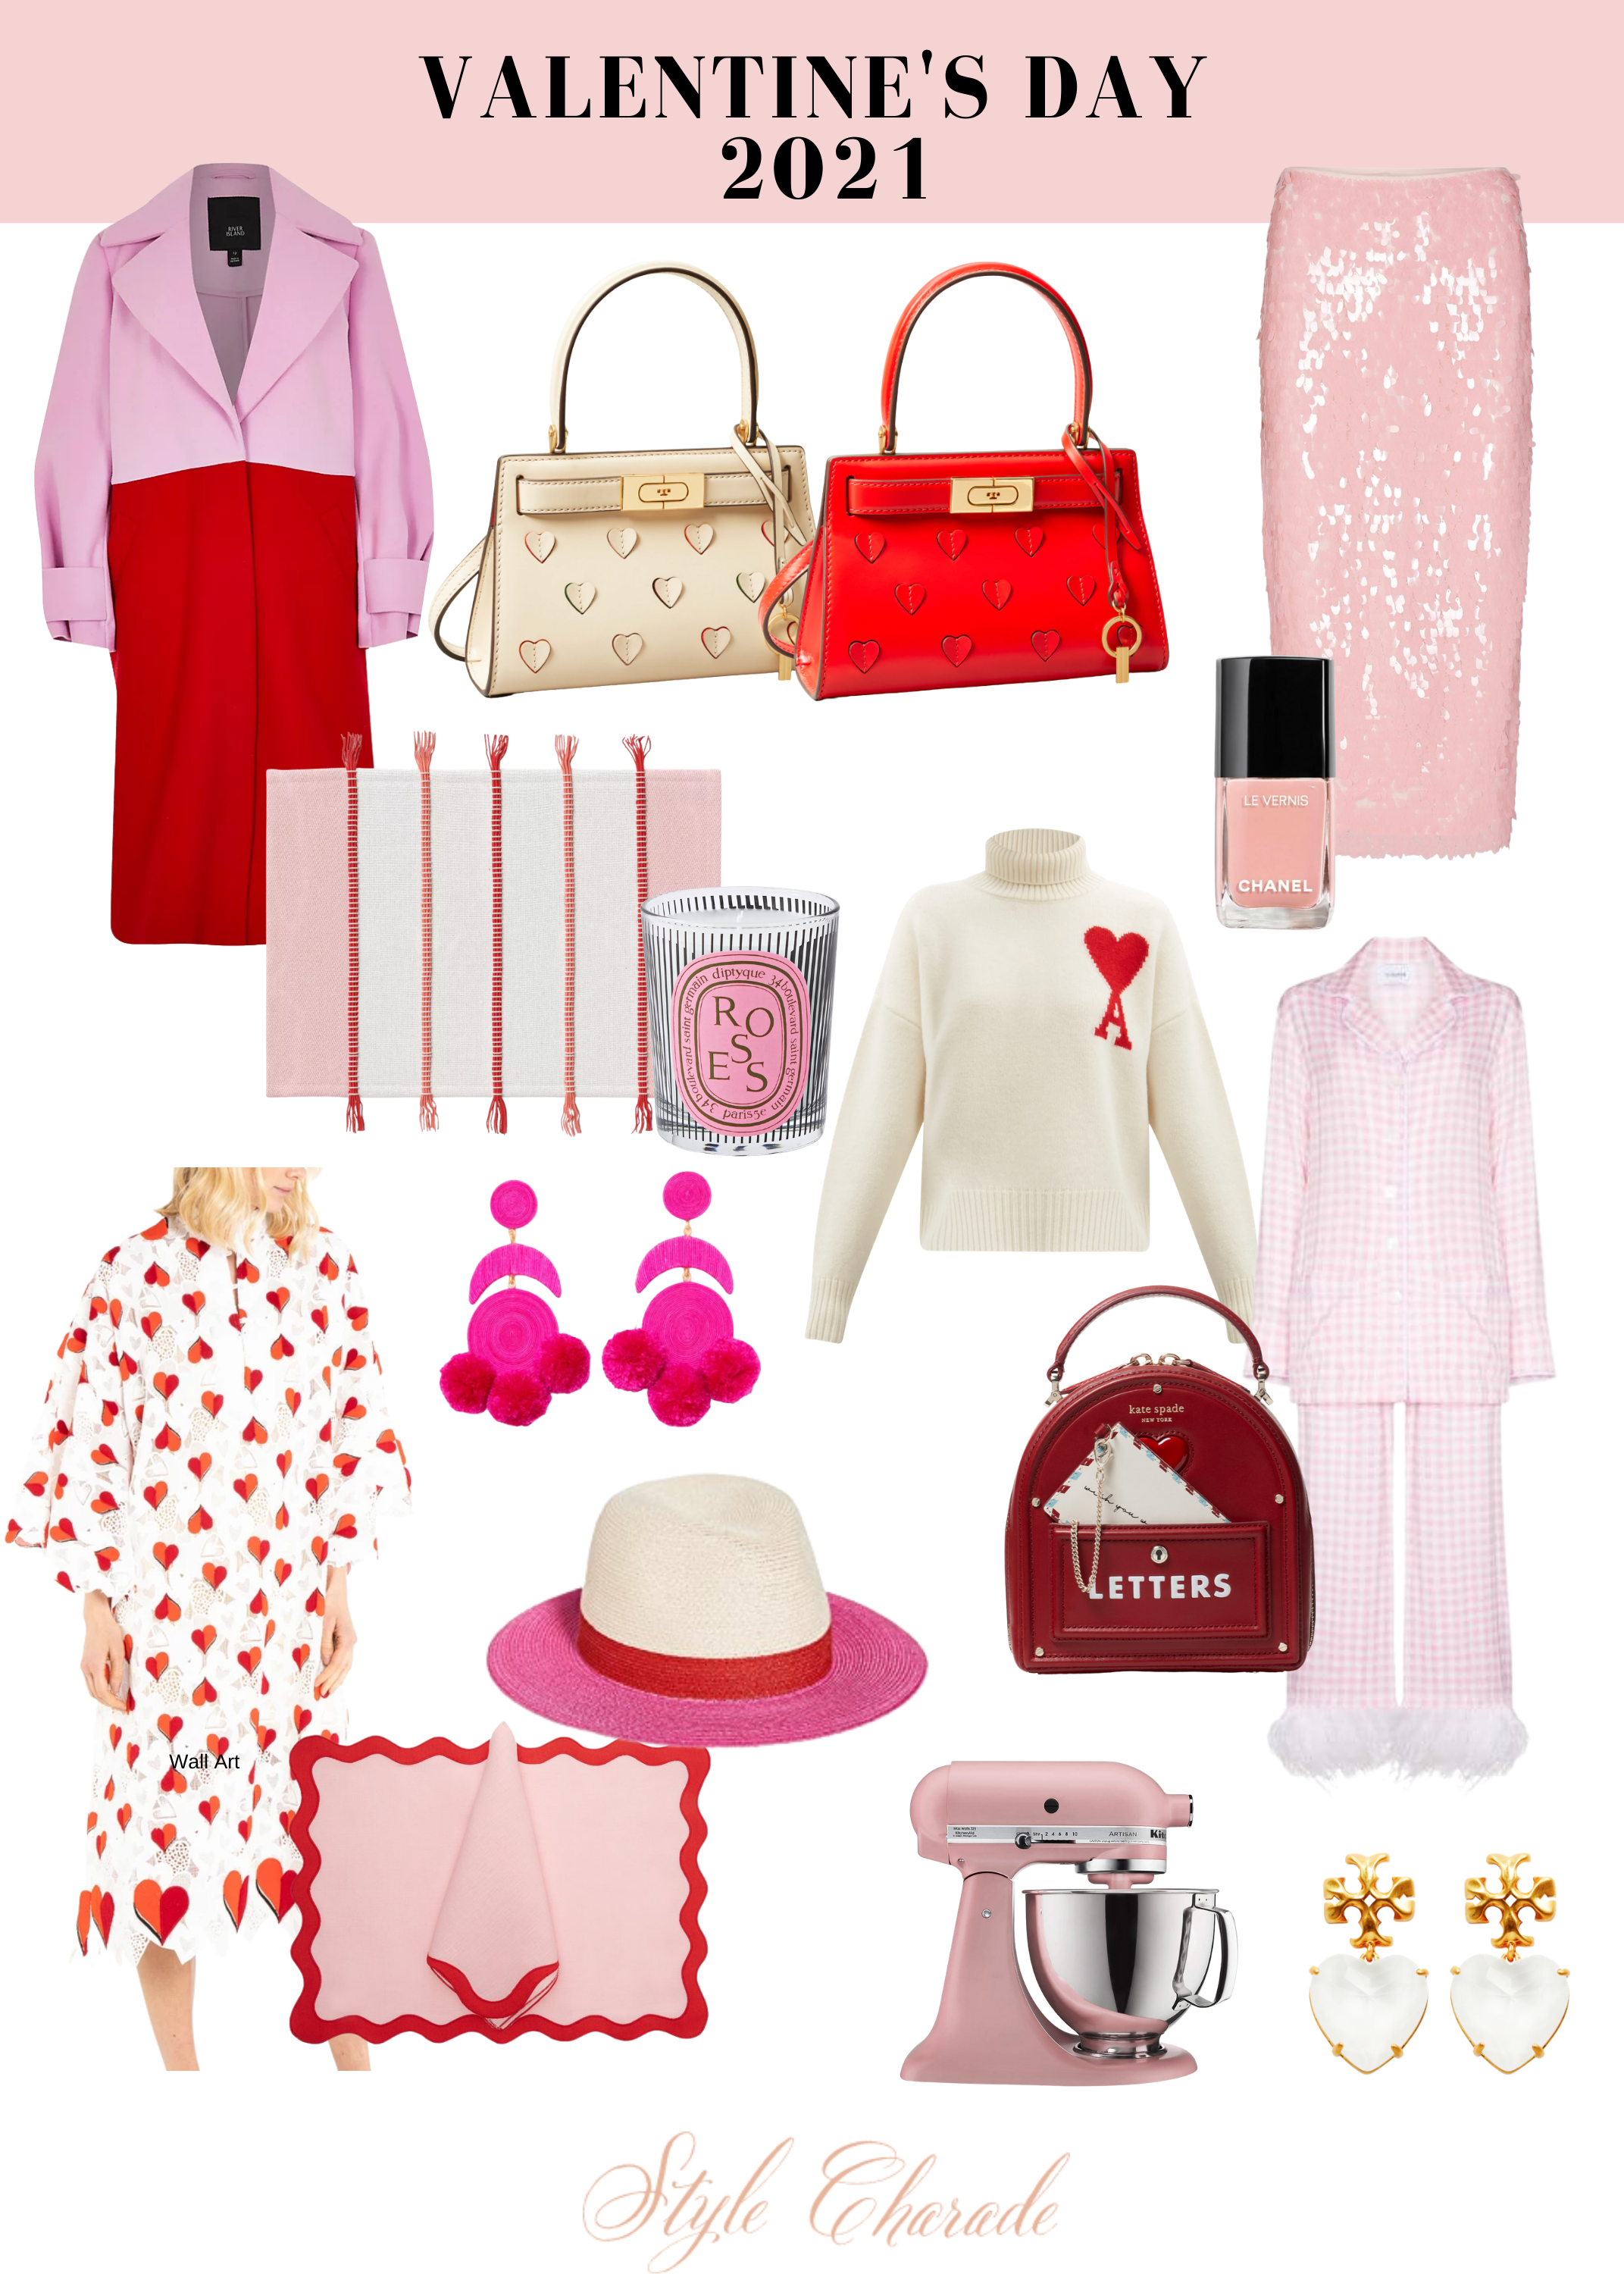 Valentine's Day Gifts for Her - My Styled Life